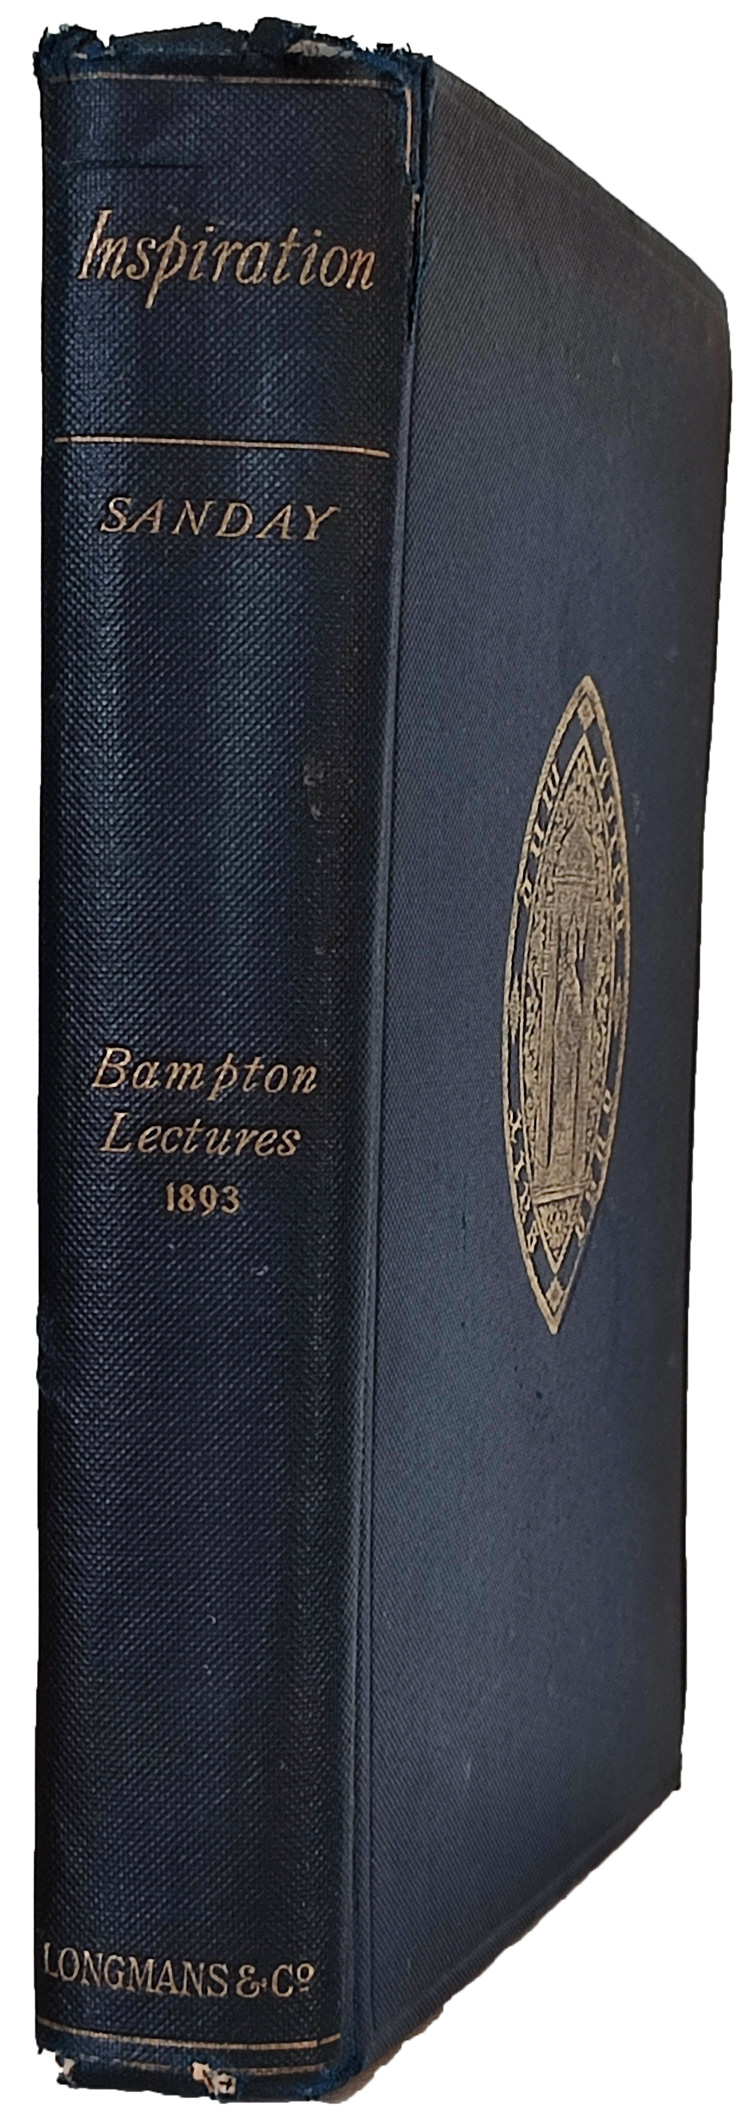 William Sanday [1843-1920], Inspiration. Eight Lectures on the Early History and Origin of the Doctrine of Biblical Inspiration. Being the Bampton Lectures for 1893